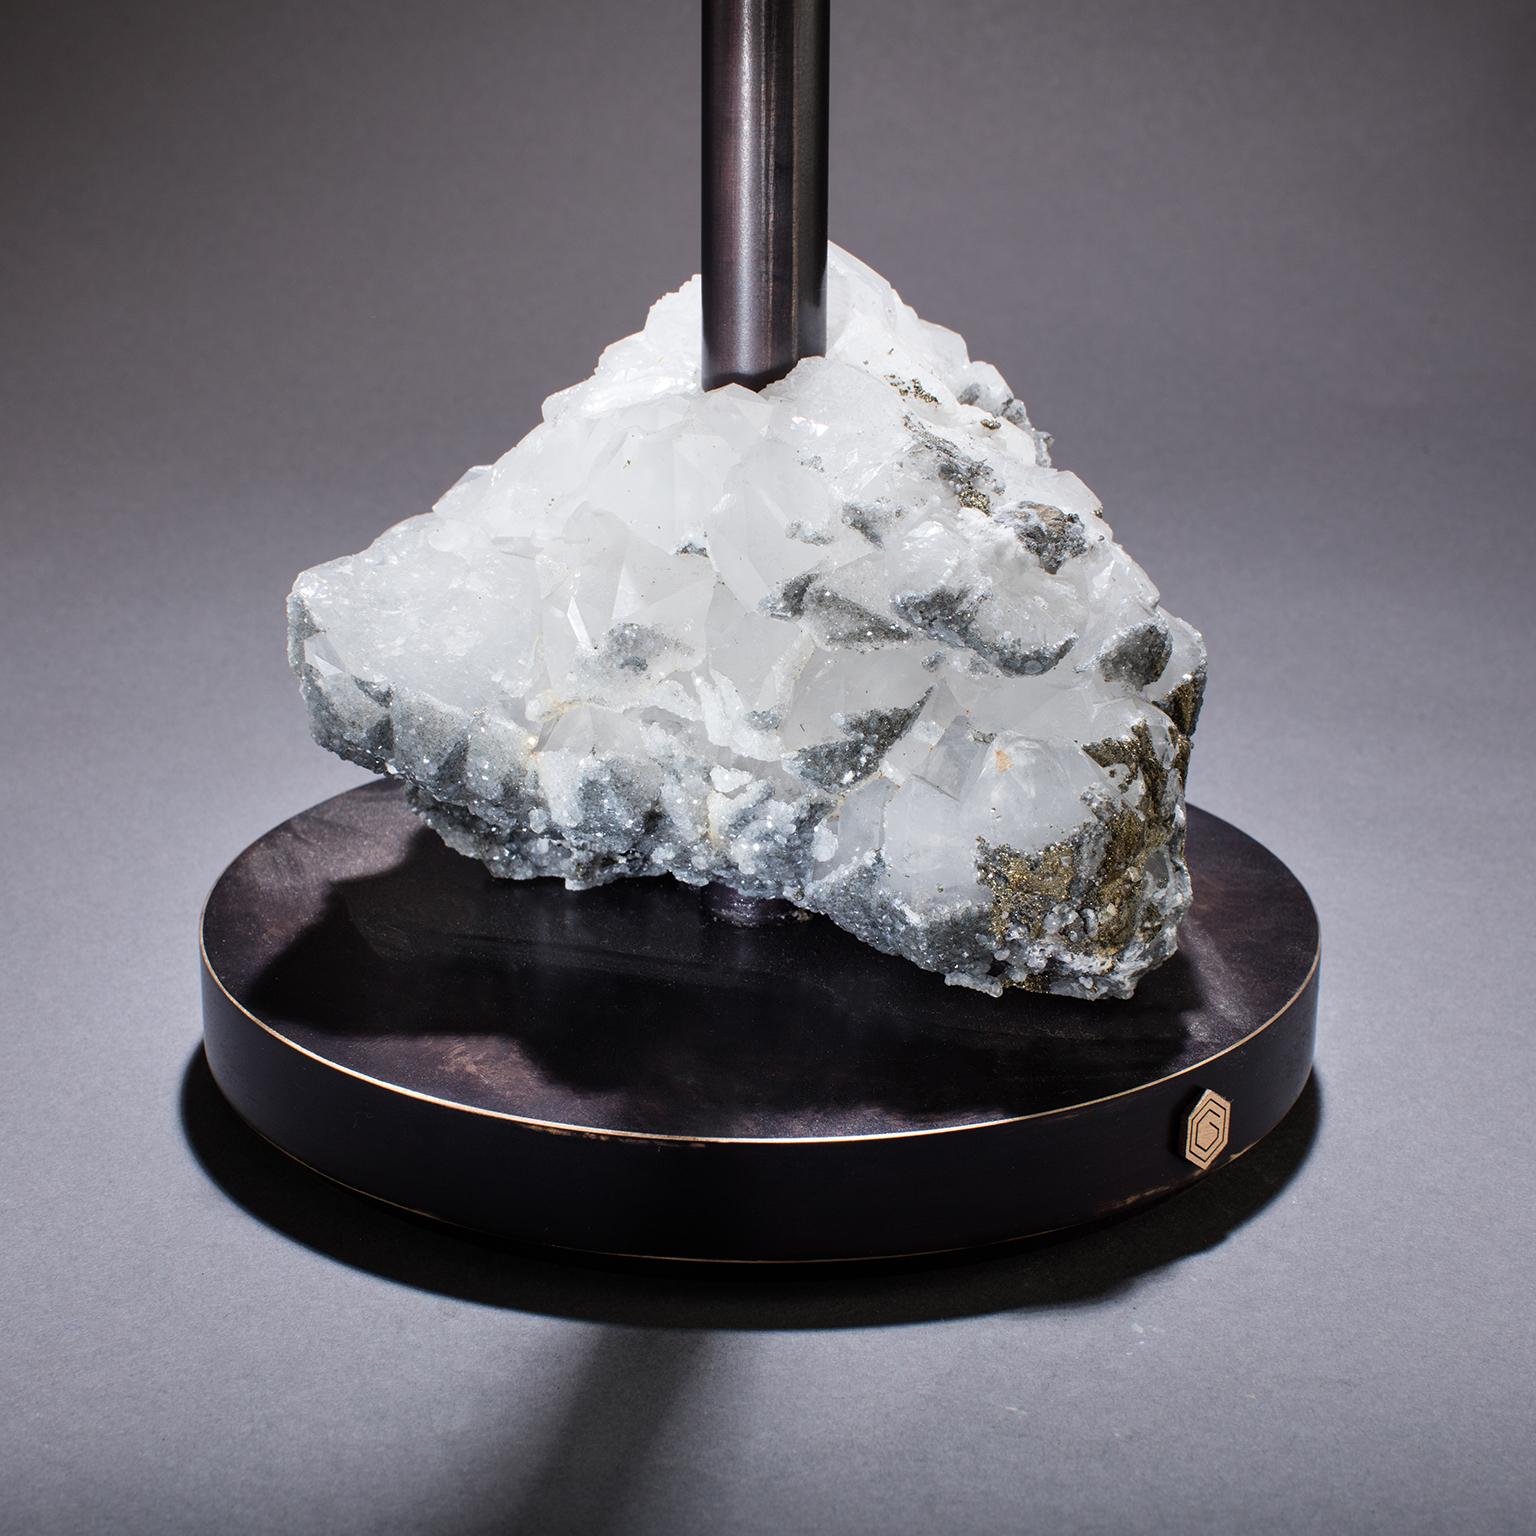 HAVANA TABLE 5

The wisdom of the gods meets the will of man in Studio Greytak’s Havana Table 5. Each prism within the frosted mountain of translucent quartz crystal at the base points skyward, drawing energy and guidance from the spiritual realm,